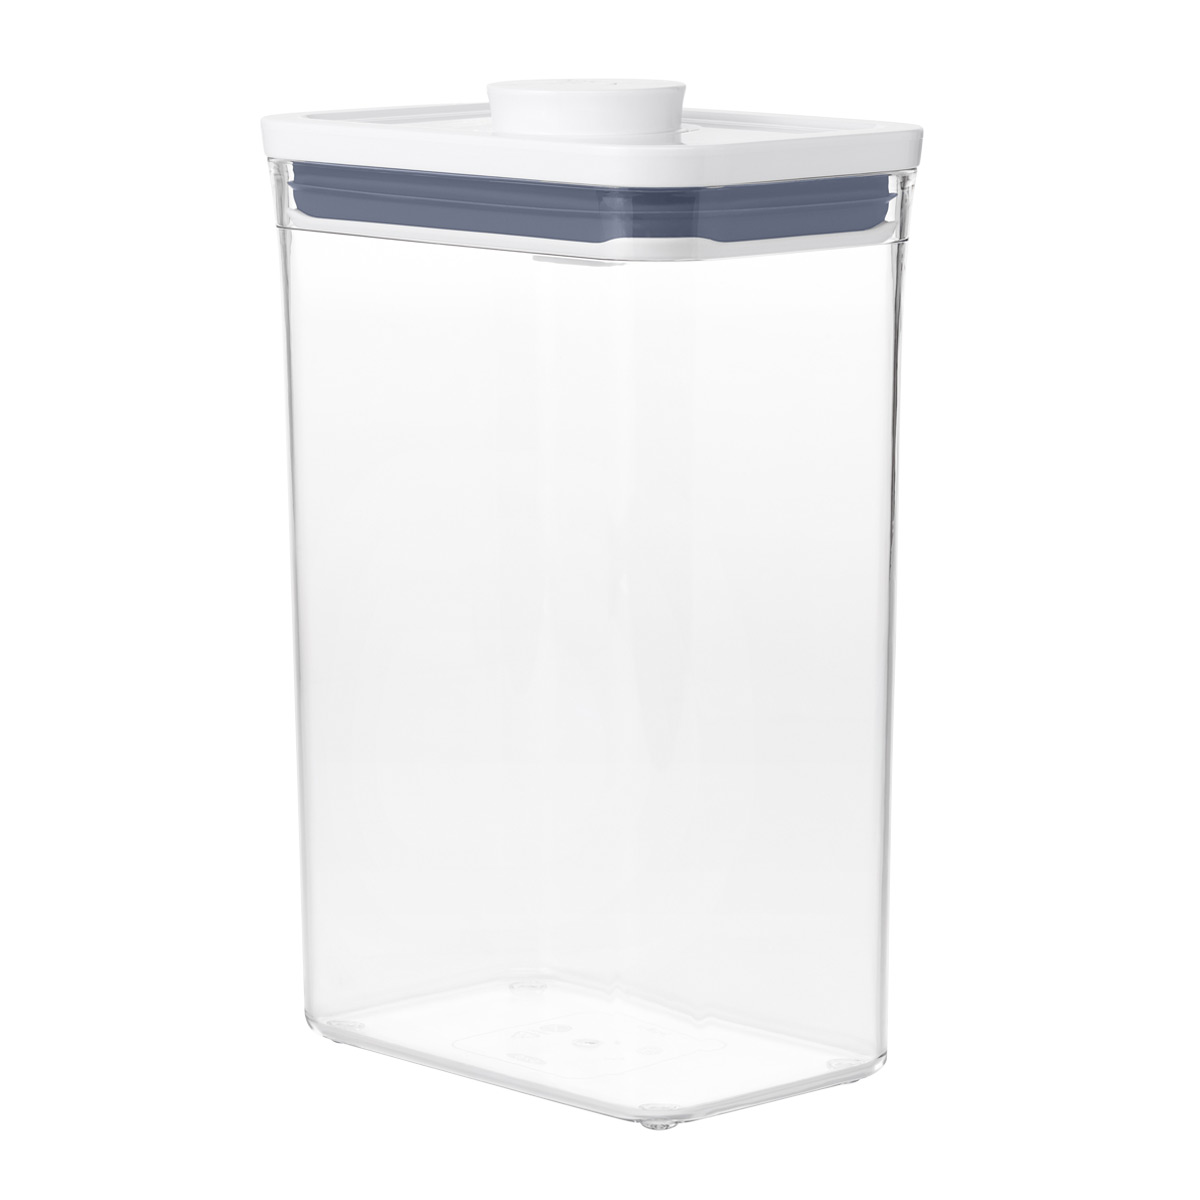 https://www.containerstore.com/catalogimages/369038/10075135-OXO-2.7-qt-POP-Container-Re.jpg